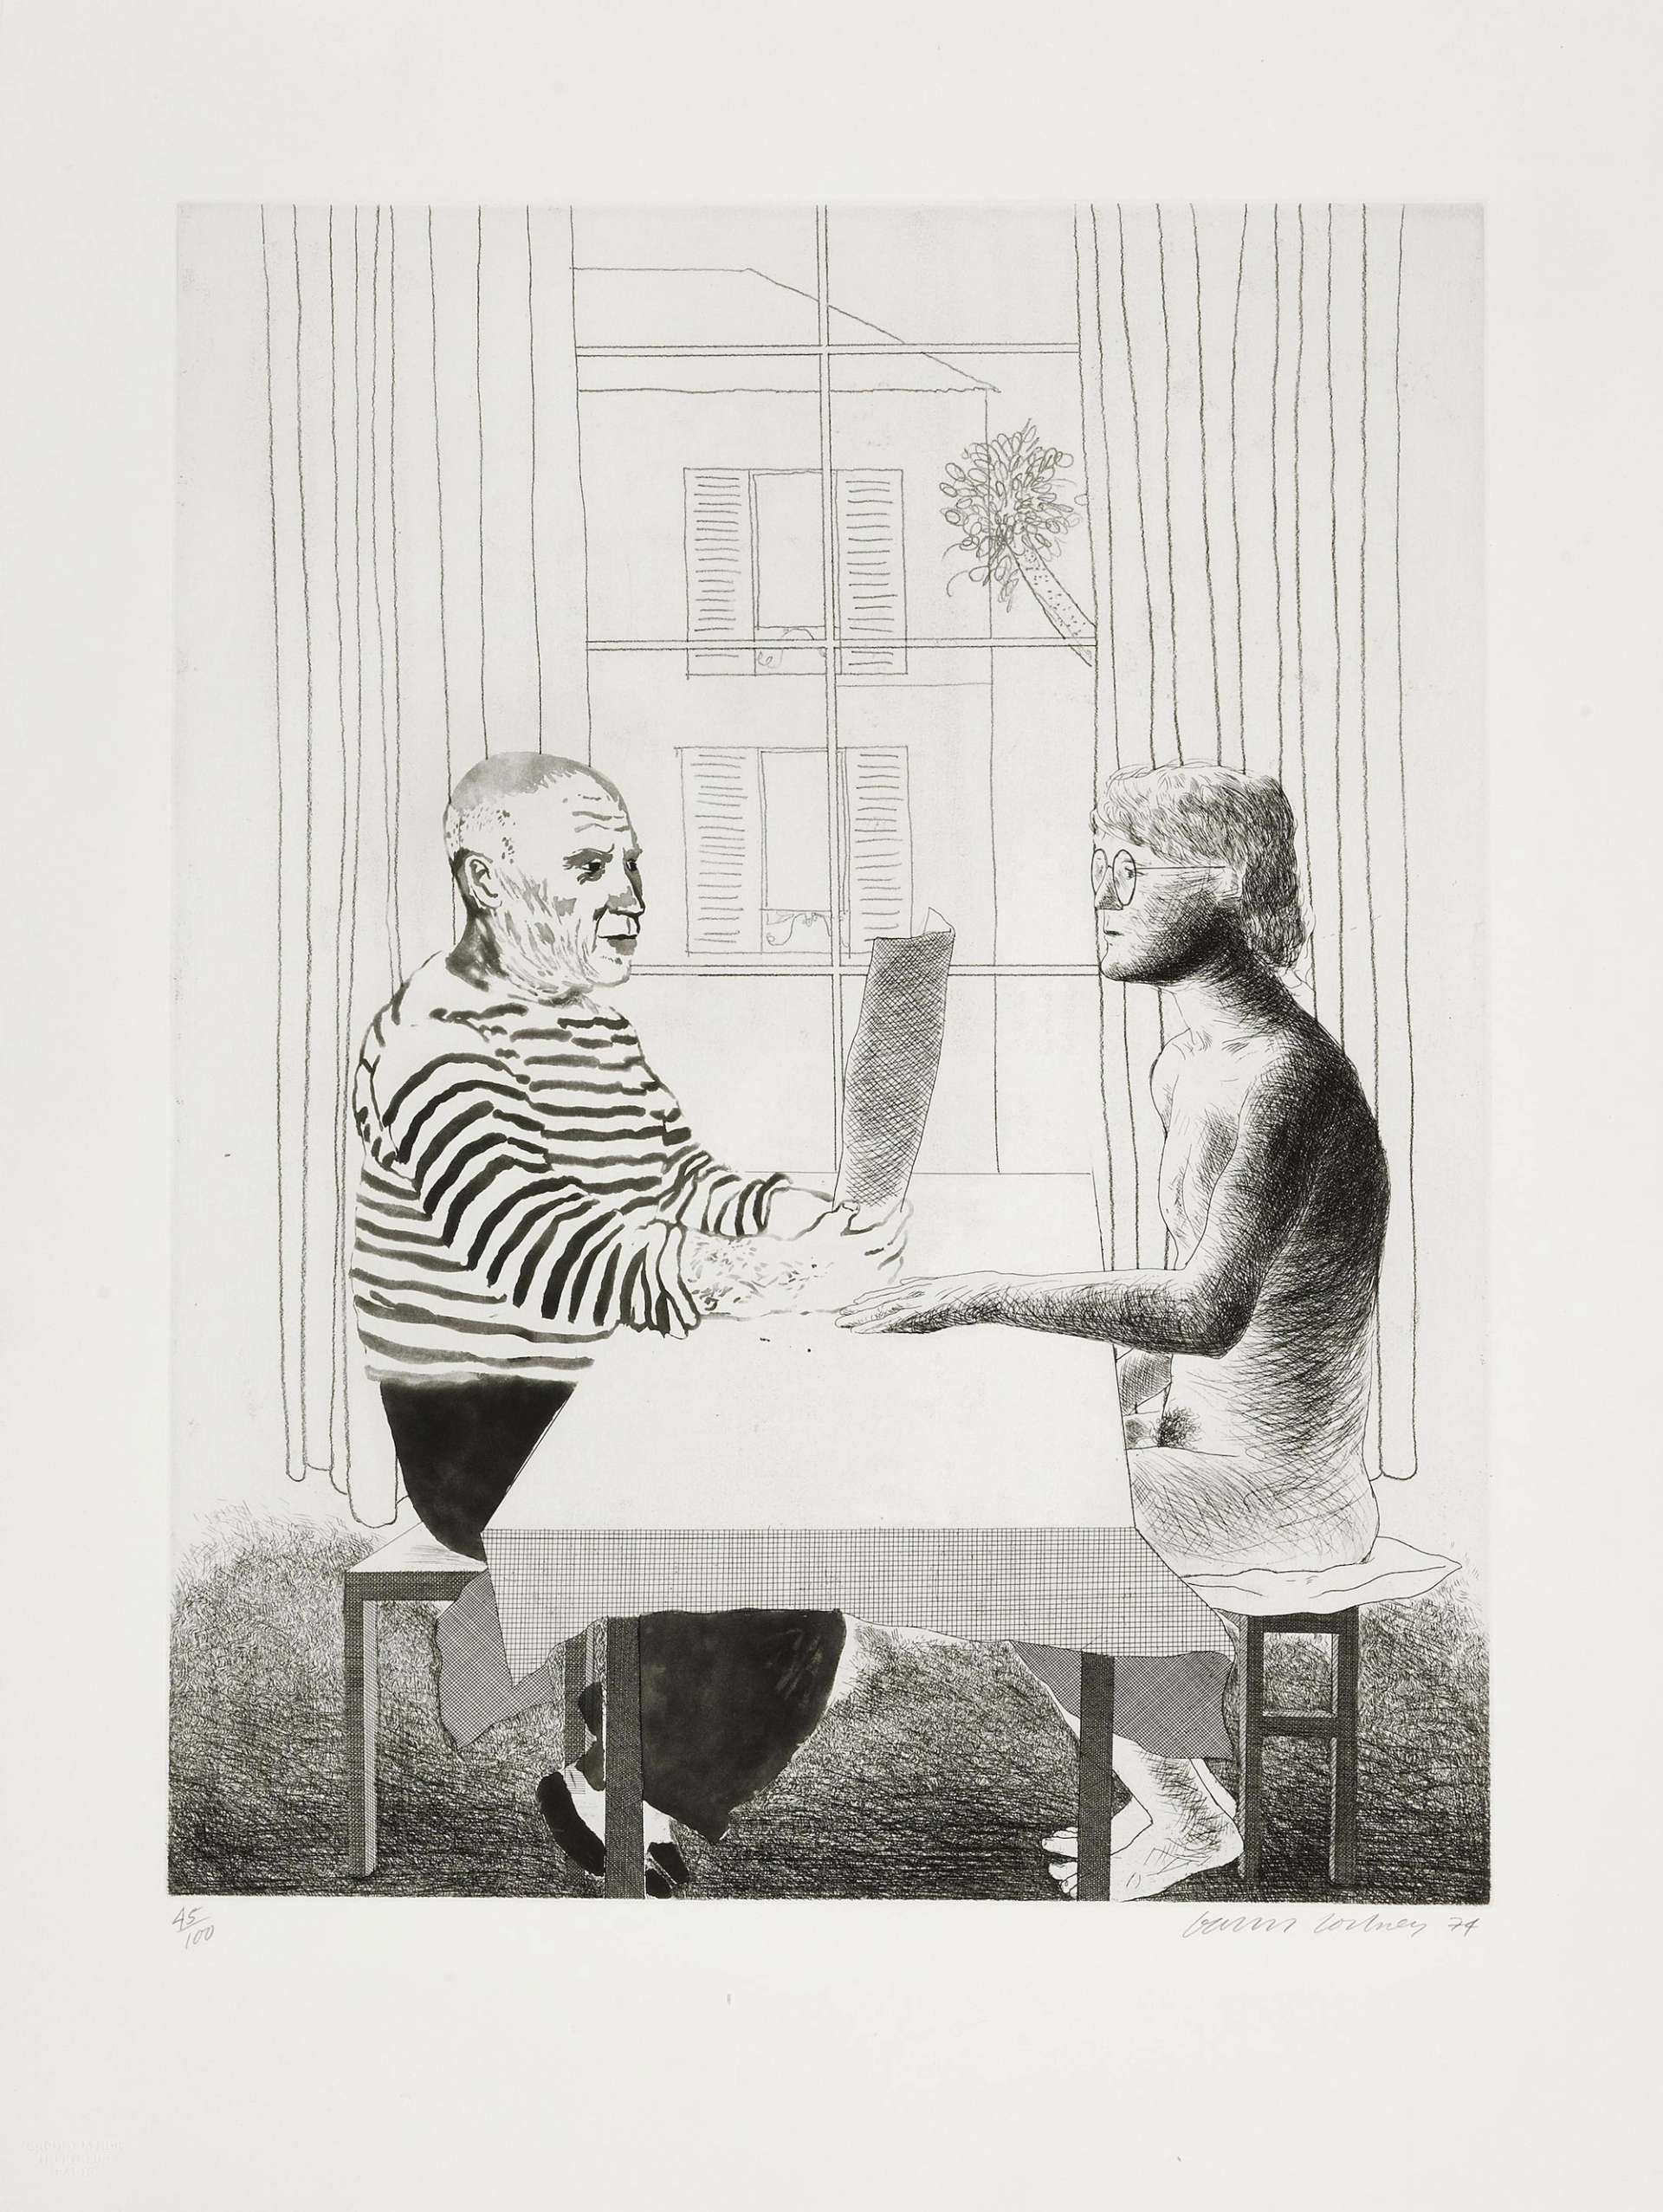 David Hockney’s Artist And Model. A monochromatic etching of a seated Pablo Picasso painting a nude David Hockney across from him at the same table in an interior setting. 